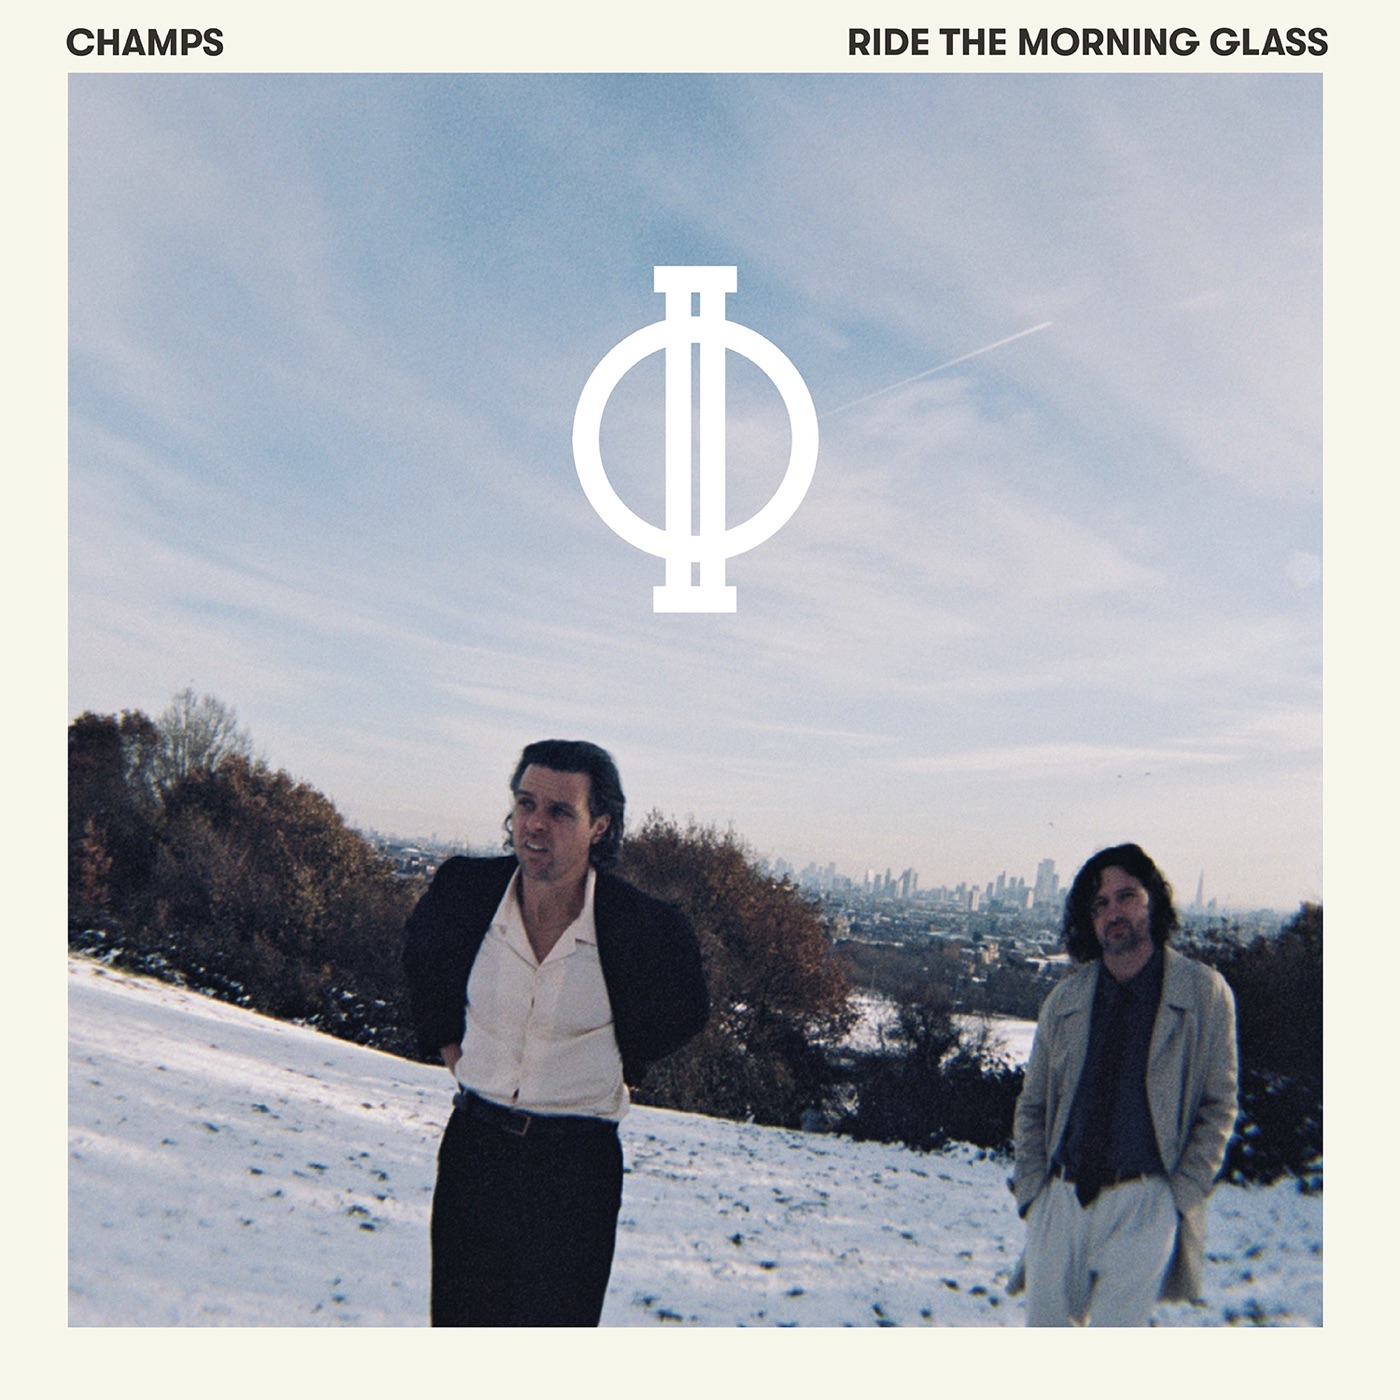 Ride The Morning Glass by CHAMPS